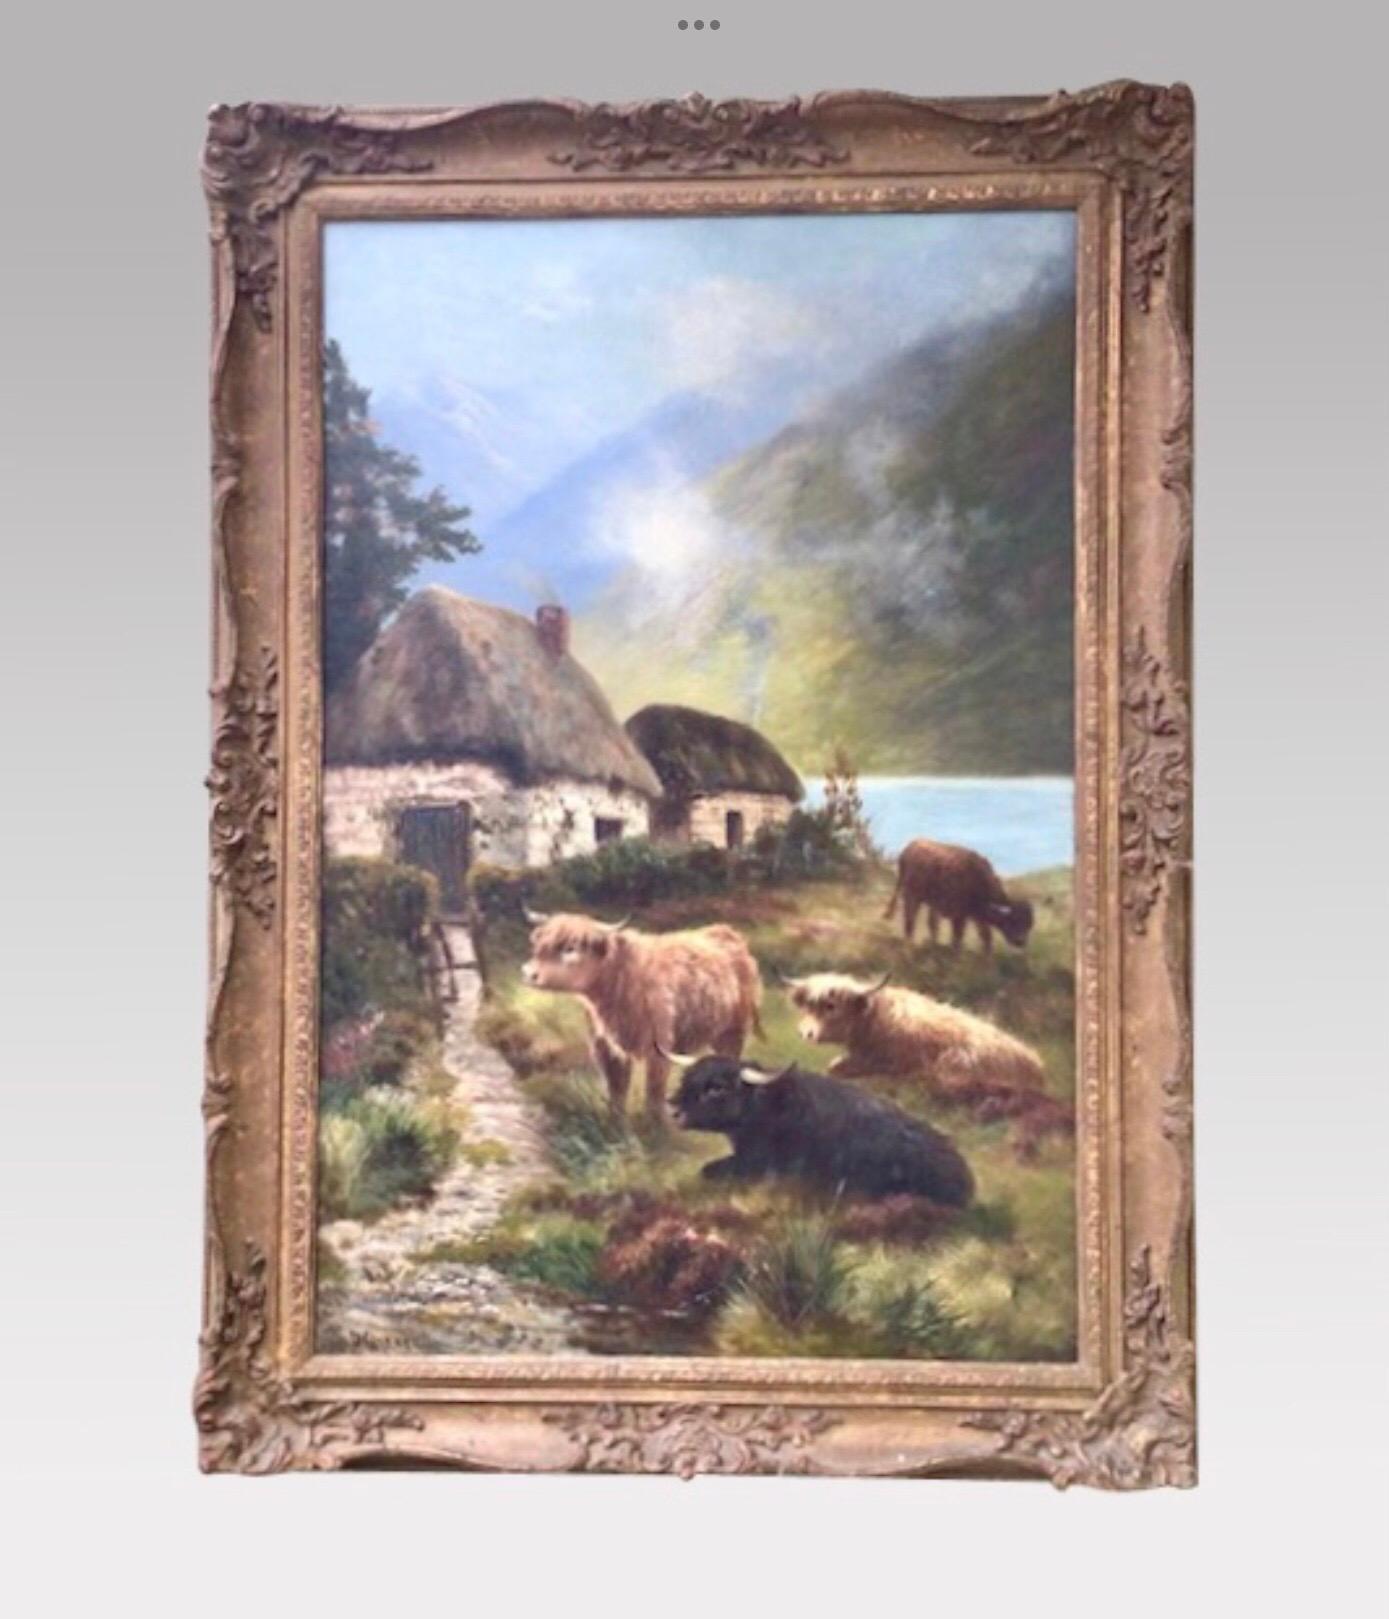 Pair of antique oil paintings by Daniel Sherrin.
Oil on canvas in original frames
Signed.
Circa 1890
Frame, 25.5 ins x 35 ins.
Canvas 20 ins x 30 ins.

Highland cattle on a Scottish mountainous landscape.

Daniel Sherrin was born in 1868 at